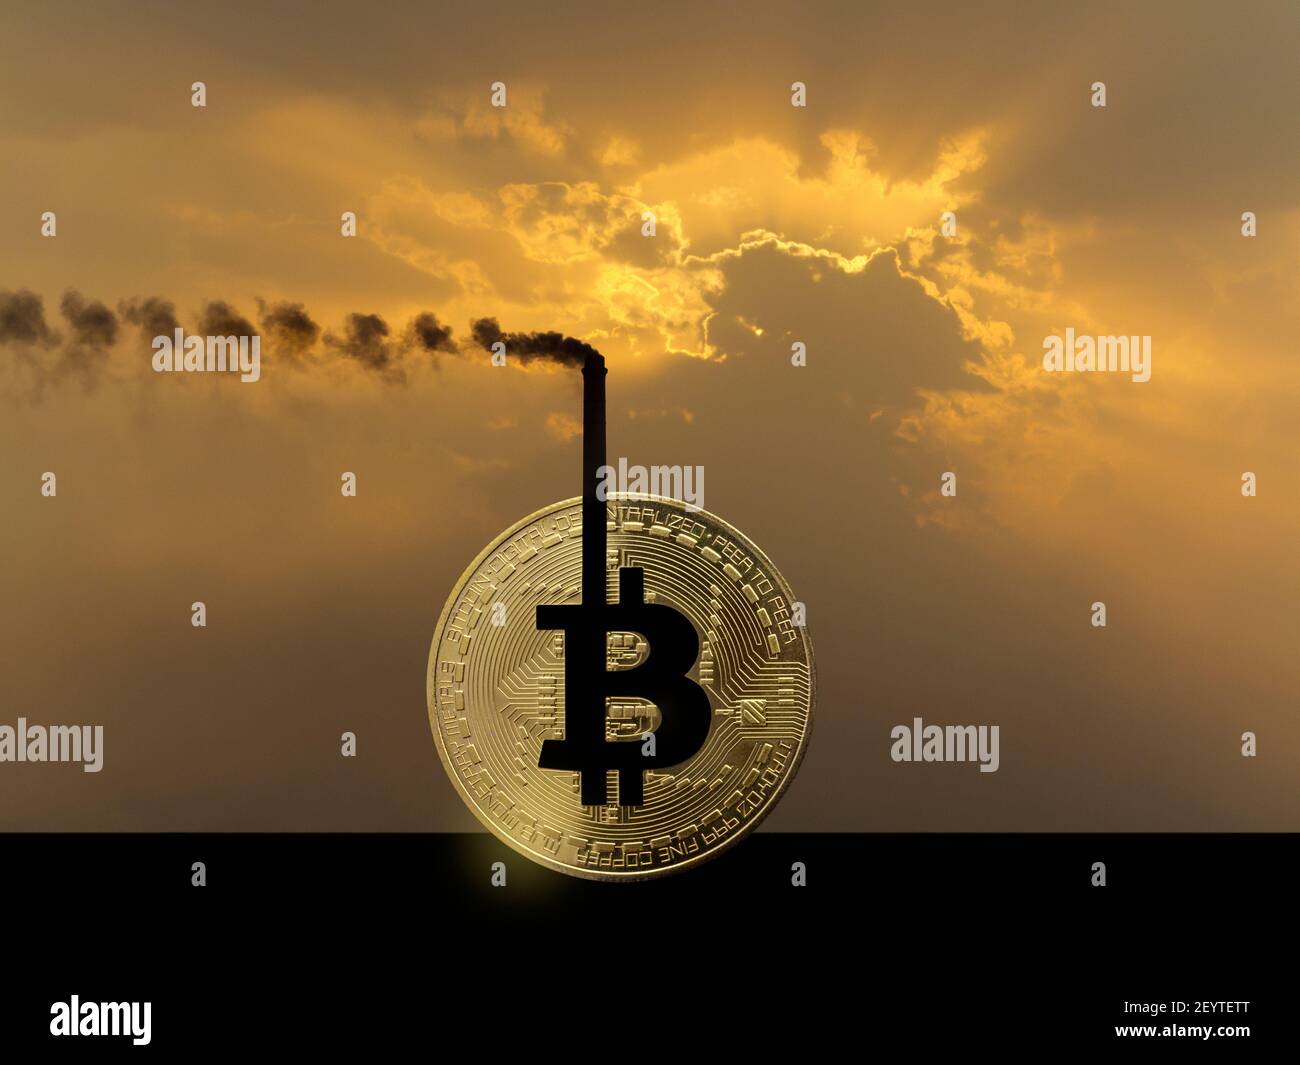 A smoking industrial chimney forming part of a bitcoin token against a dramatic orange sky illustrating the power consumption of cryptocurrency Stock Photo